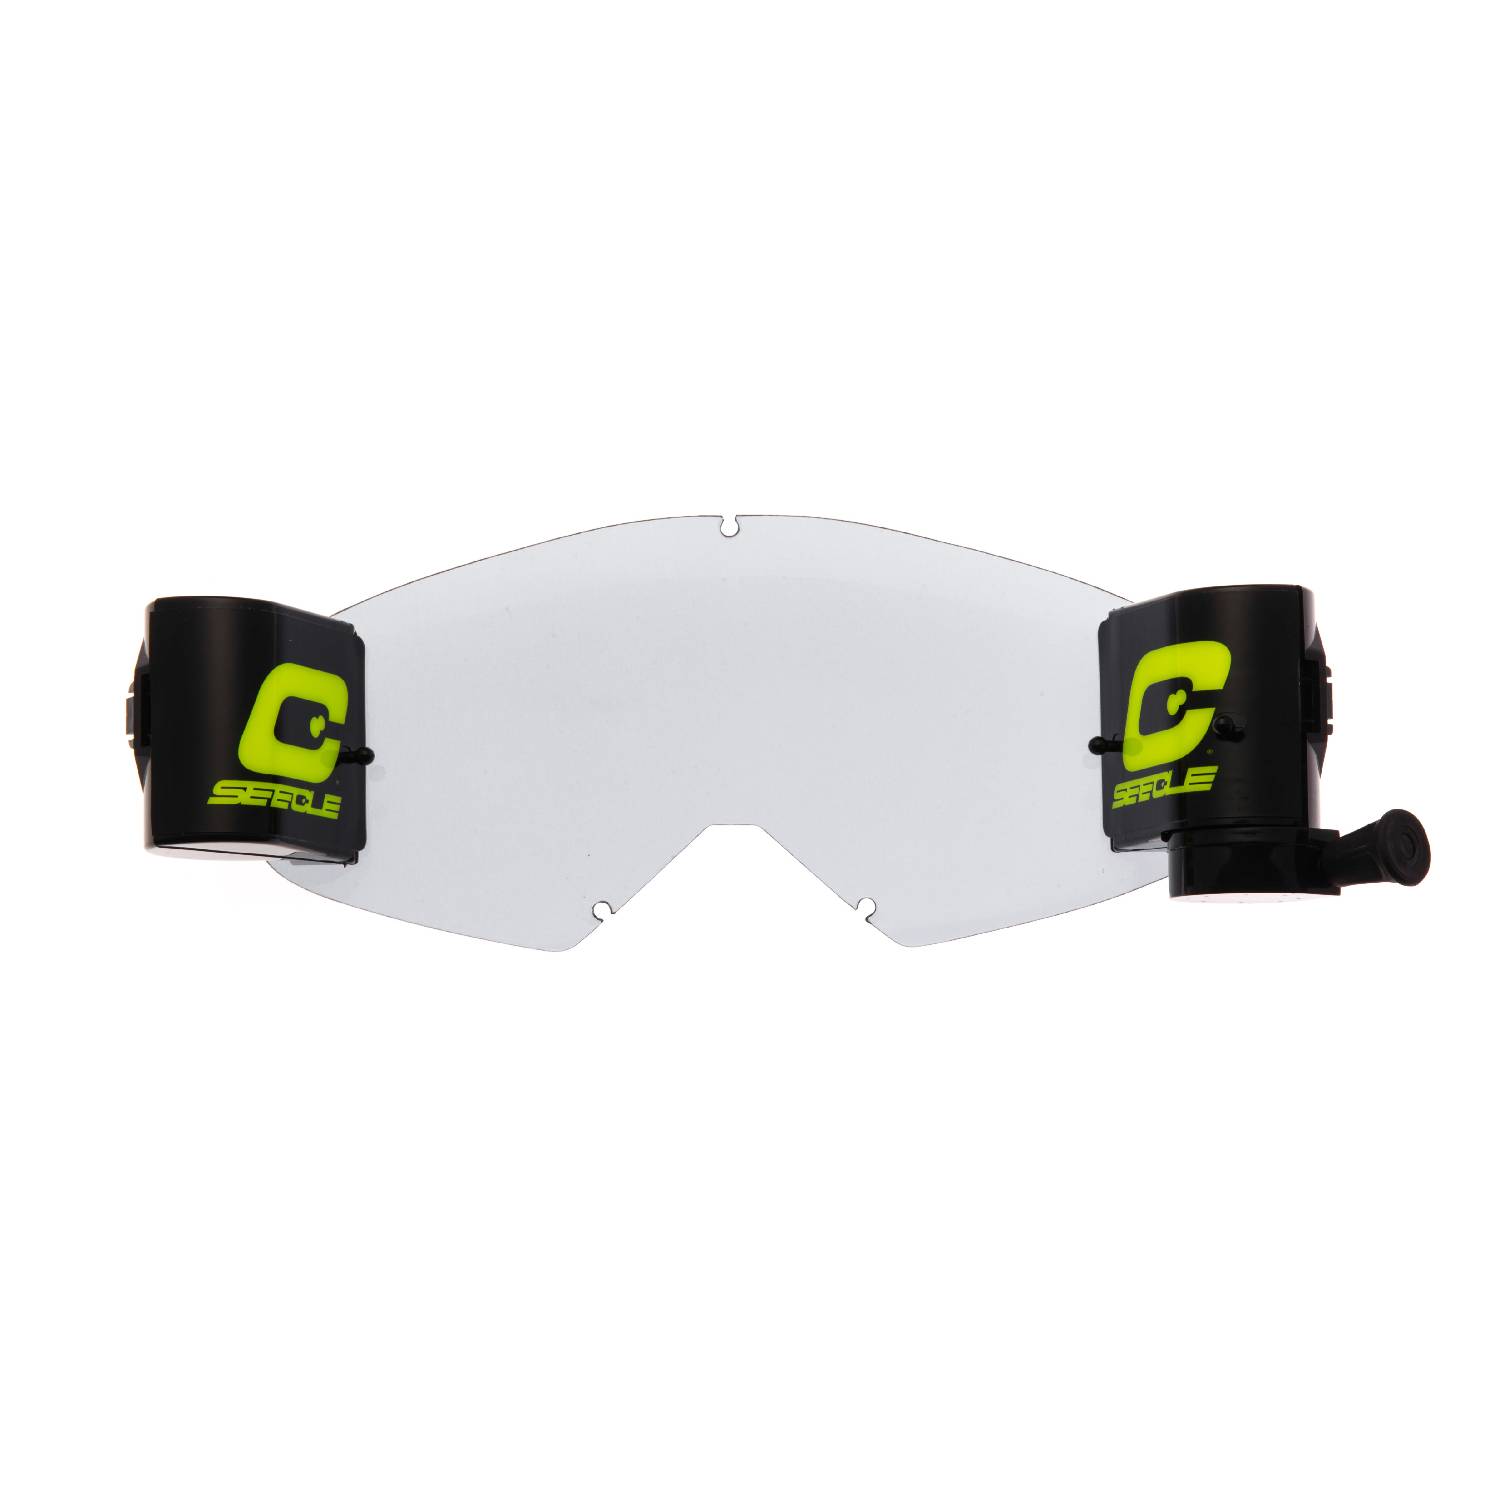 mud device kit clear compatible for Oakley Mayhem goggle